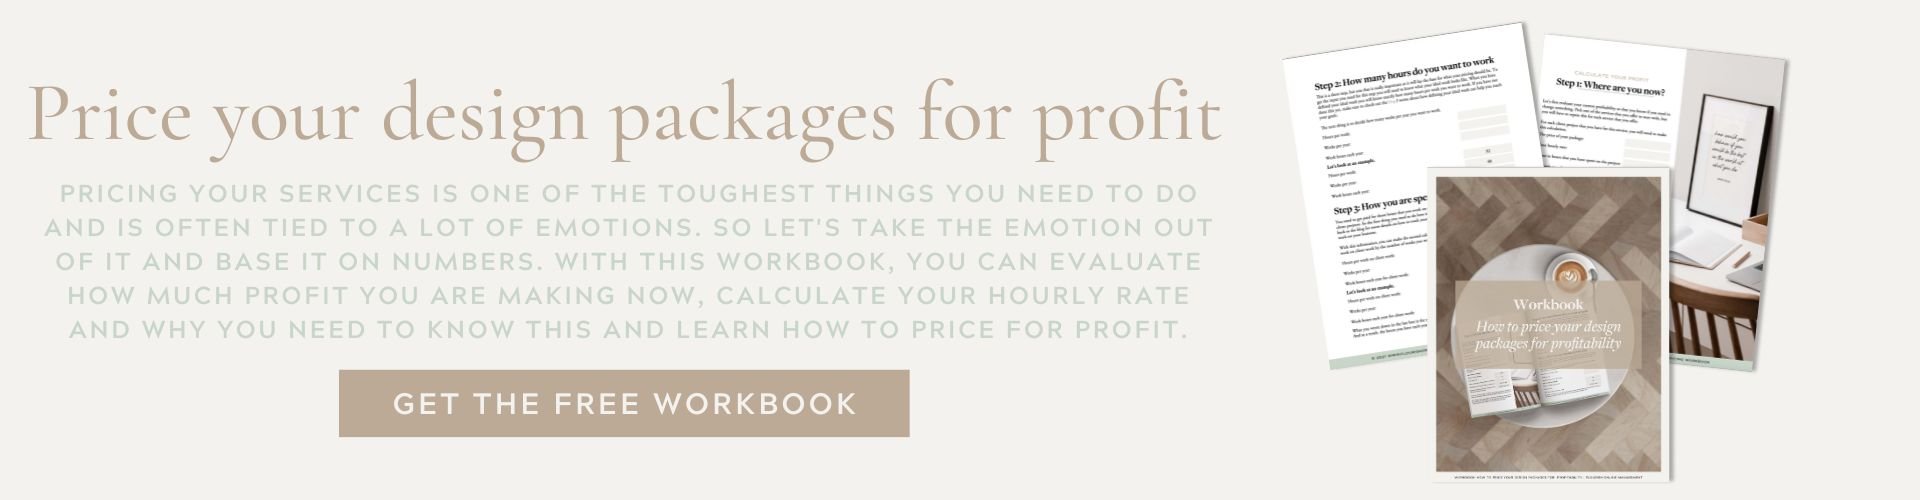 Free Resource - Price your design packages for profit by Flourish Online Management - Sand Background.jpg (Copy) (Copy)